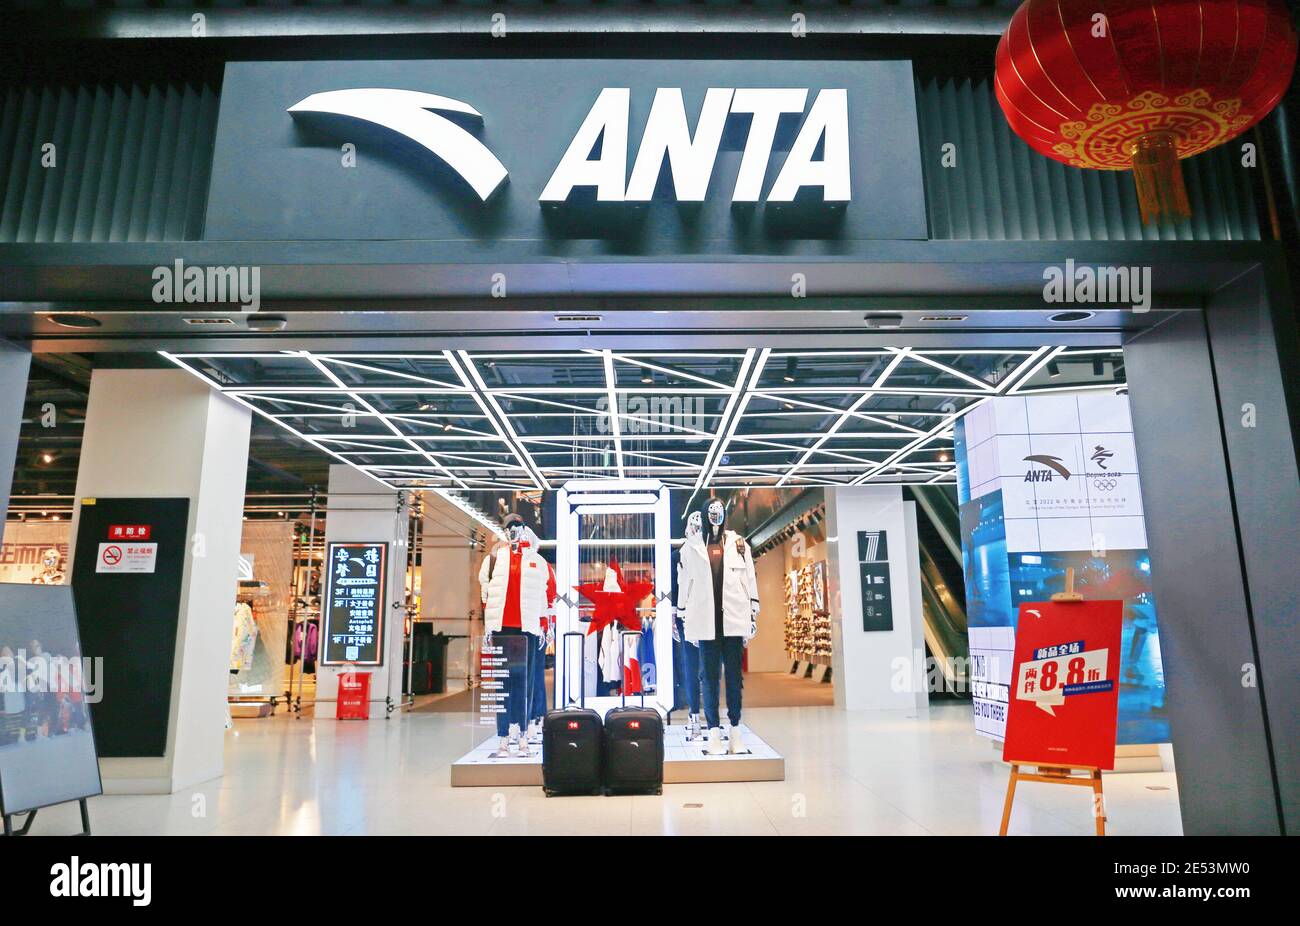 SHANGHAI, CHINA - JANUARY 25, 2021 - Yuyuan store of Anta sportswear brand  in Shanghai, China, Jan 25, 2021. Anta, which owns brands such as Fila, is  the world's fourth-largest sportswear company